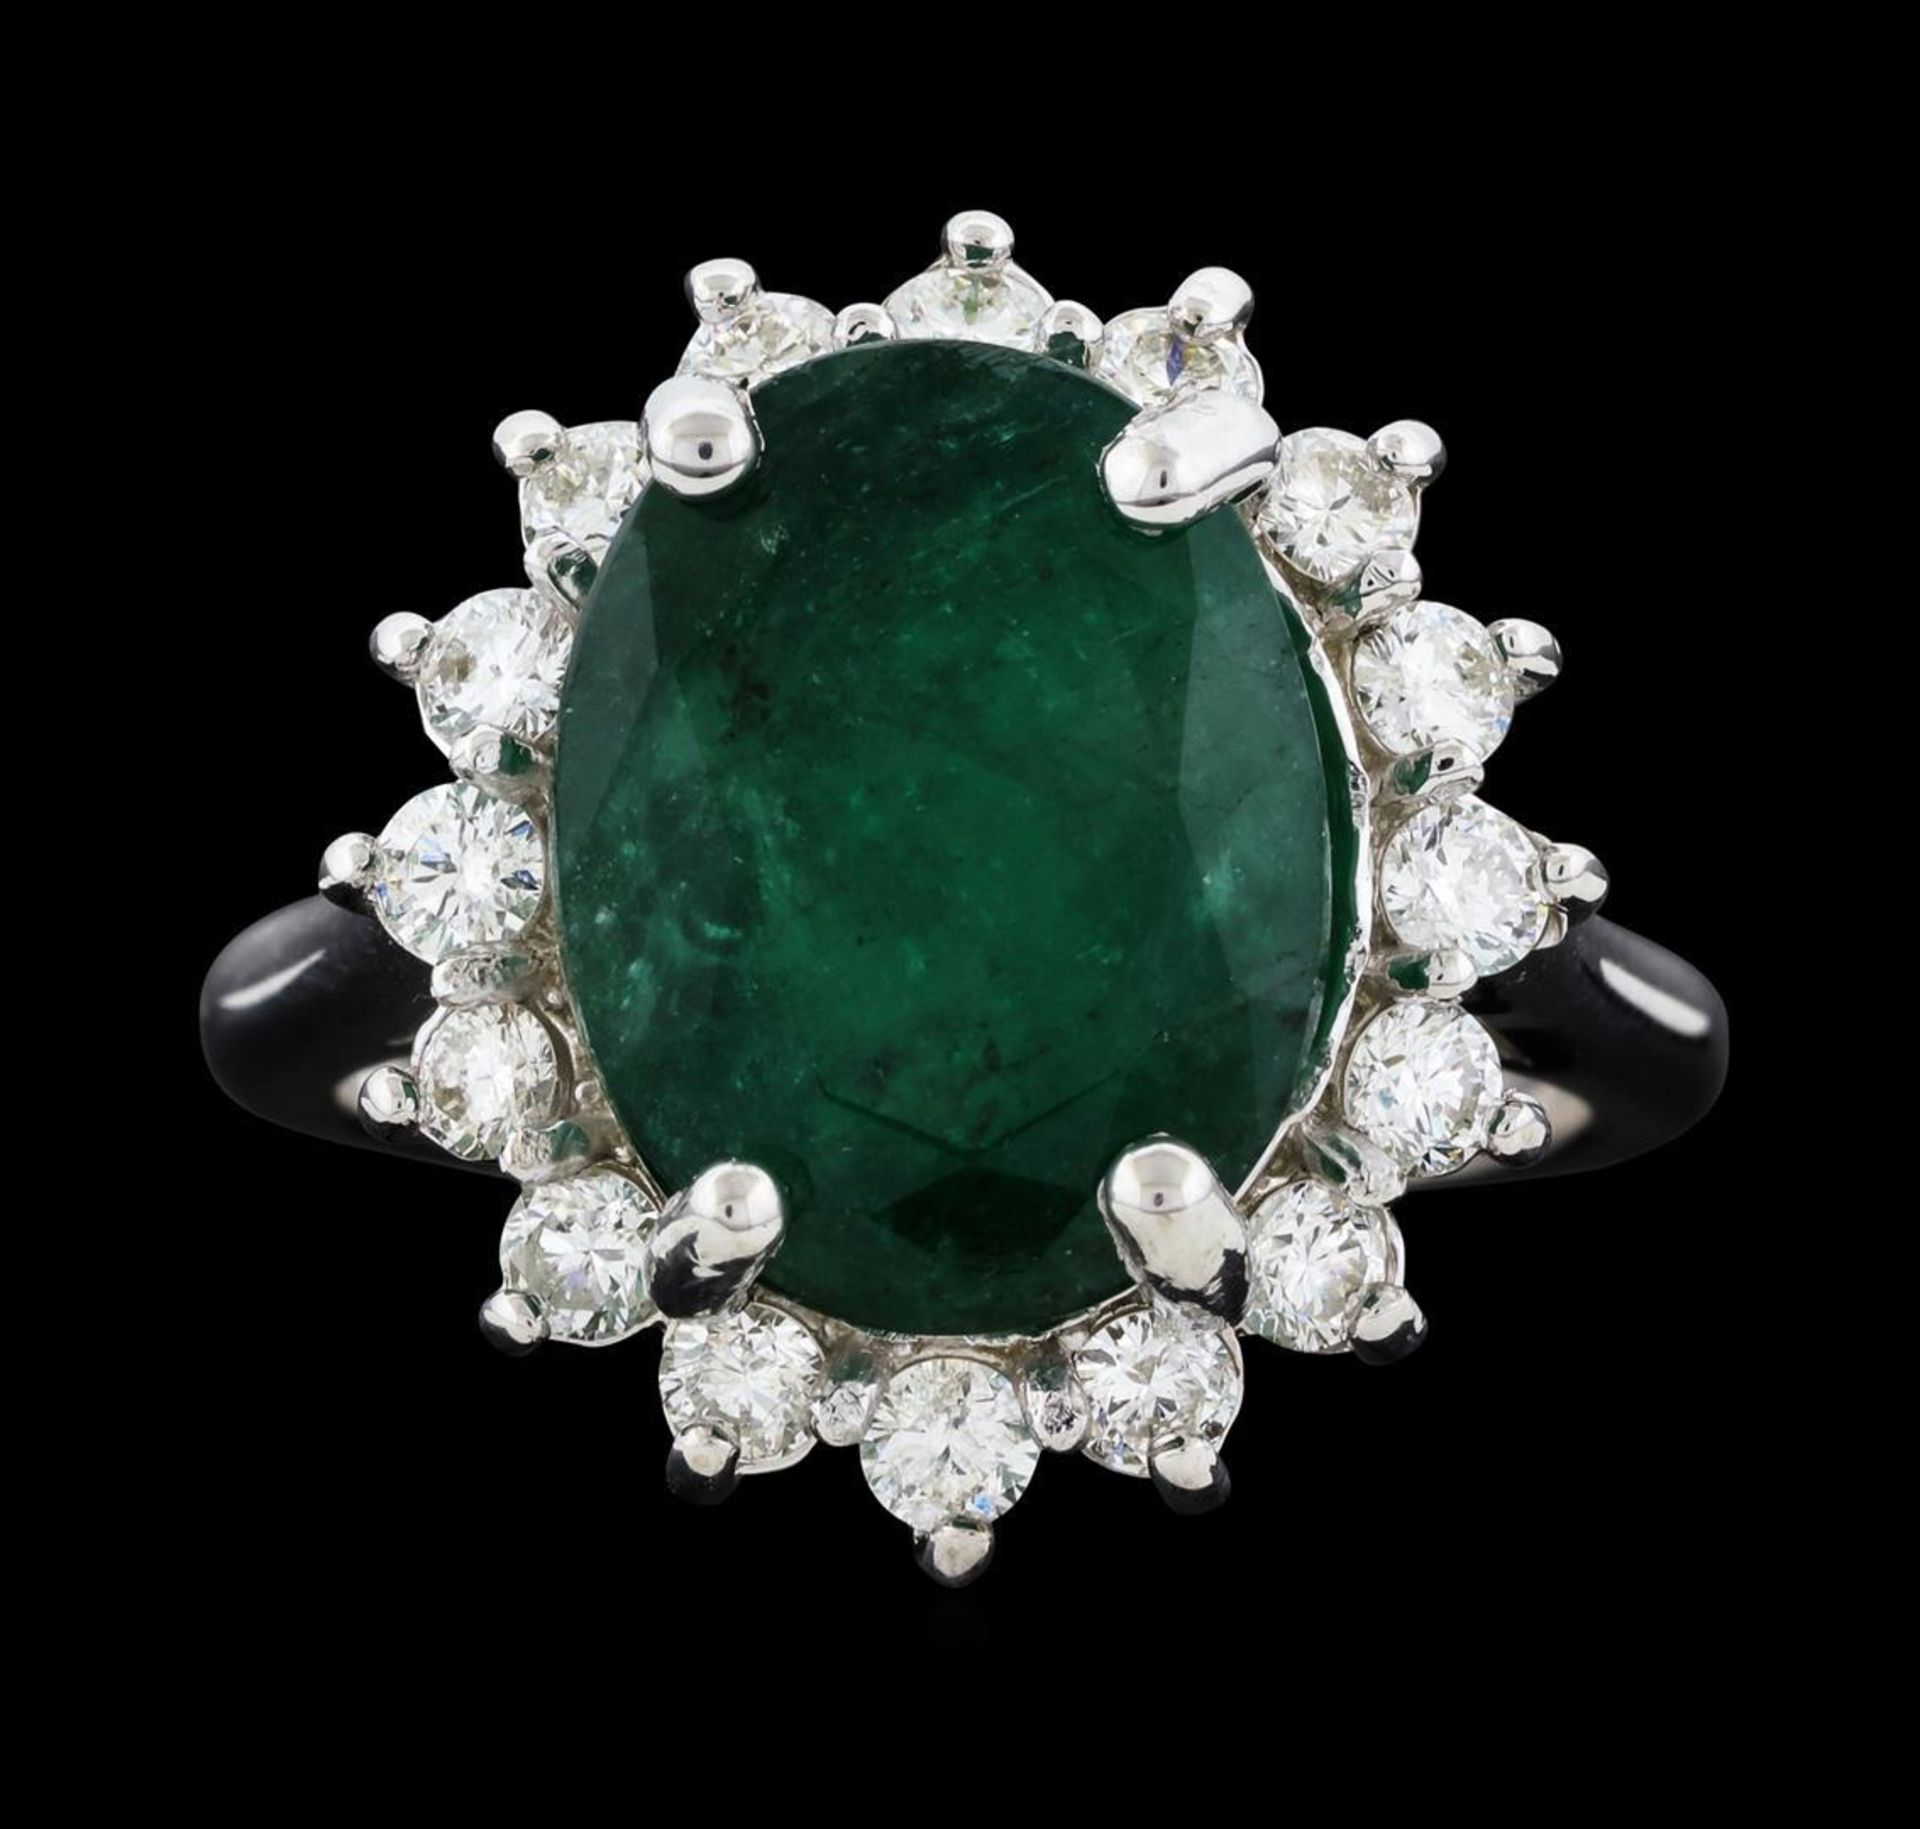 6.51 ctw Emerald and Diamond Ring - 14KT White Gold - Image 2 of 5